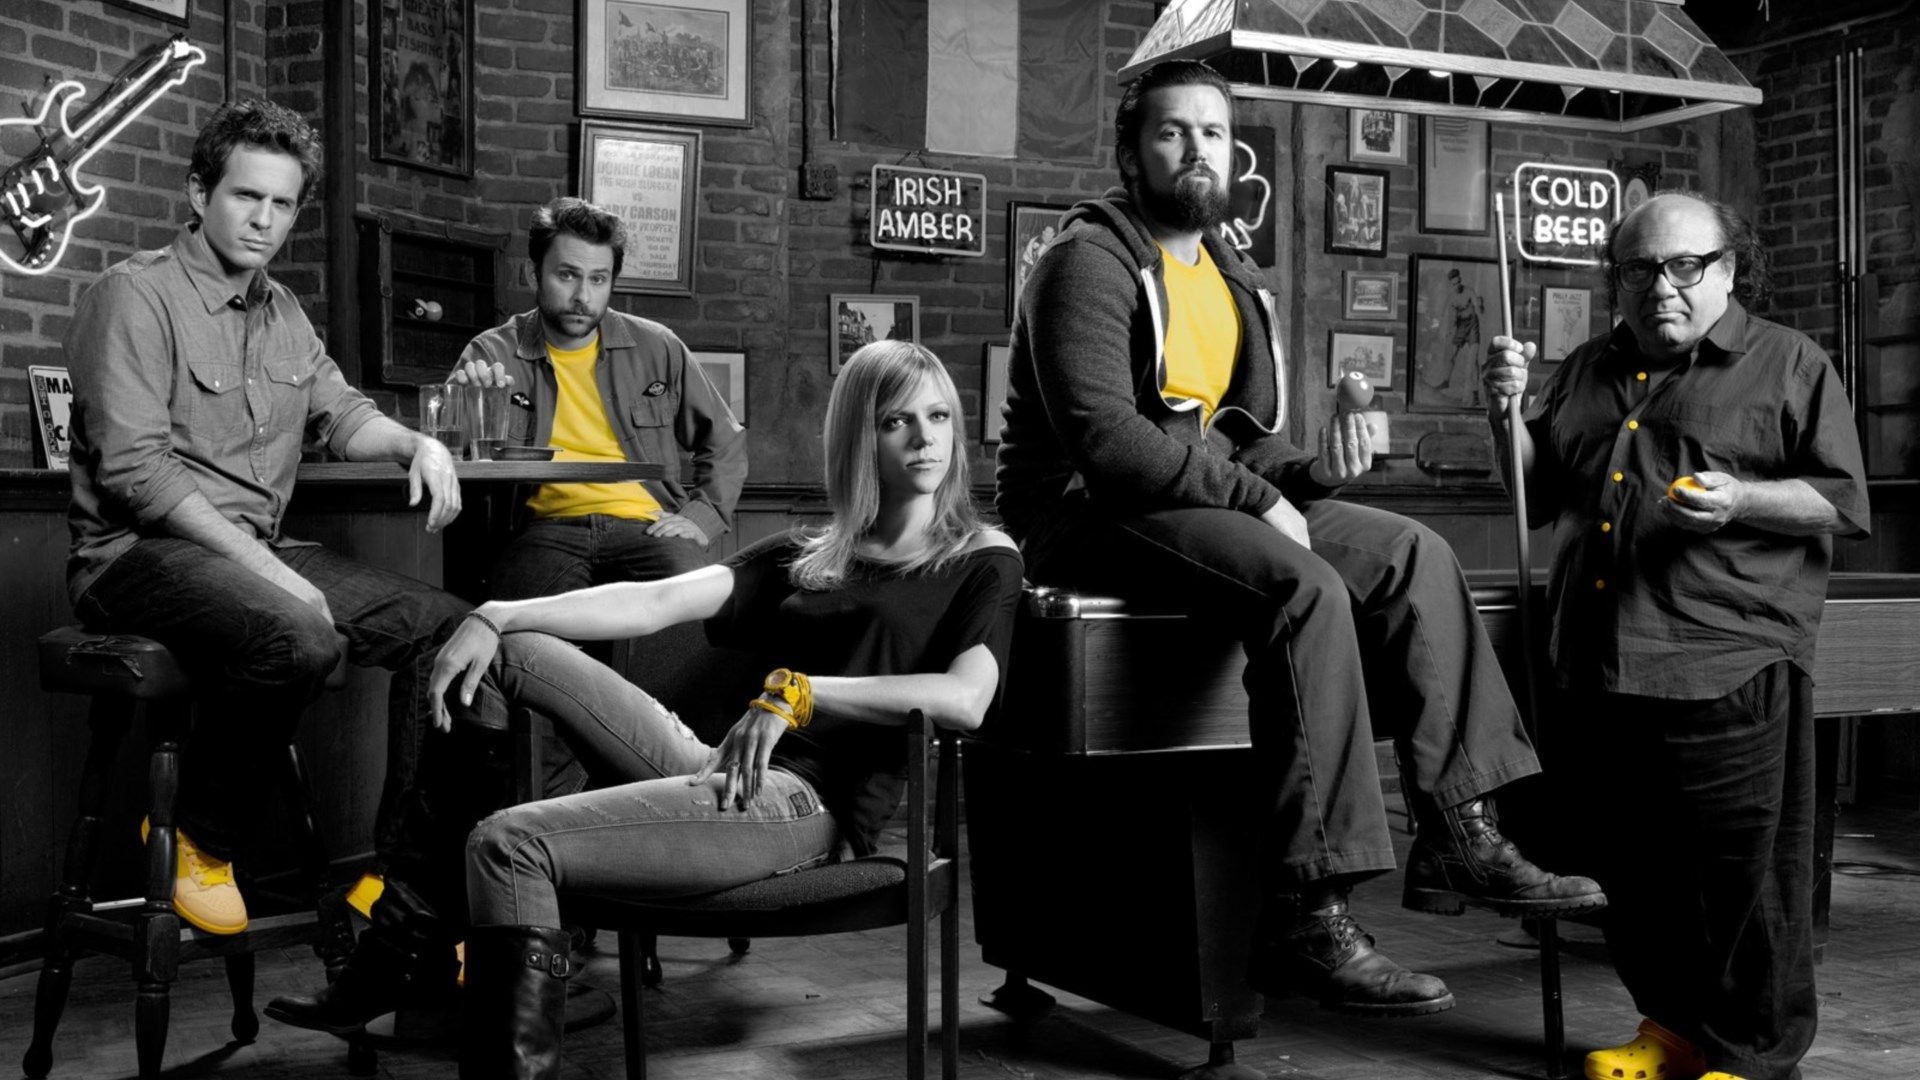 It's Always Sunny in Philadelphia (TV Series): Black and white, Movie poster, An American sitcom following the exploits of a group of friends. 1920x1080 Full HD Background.